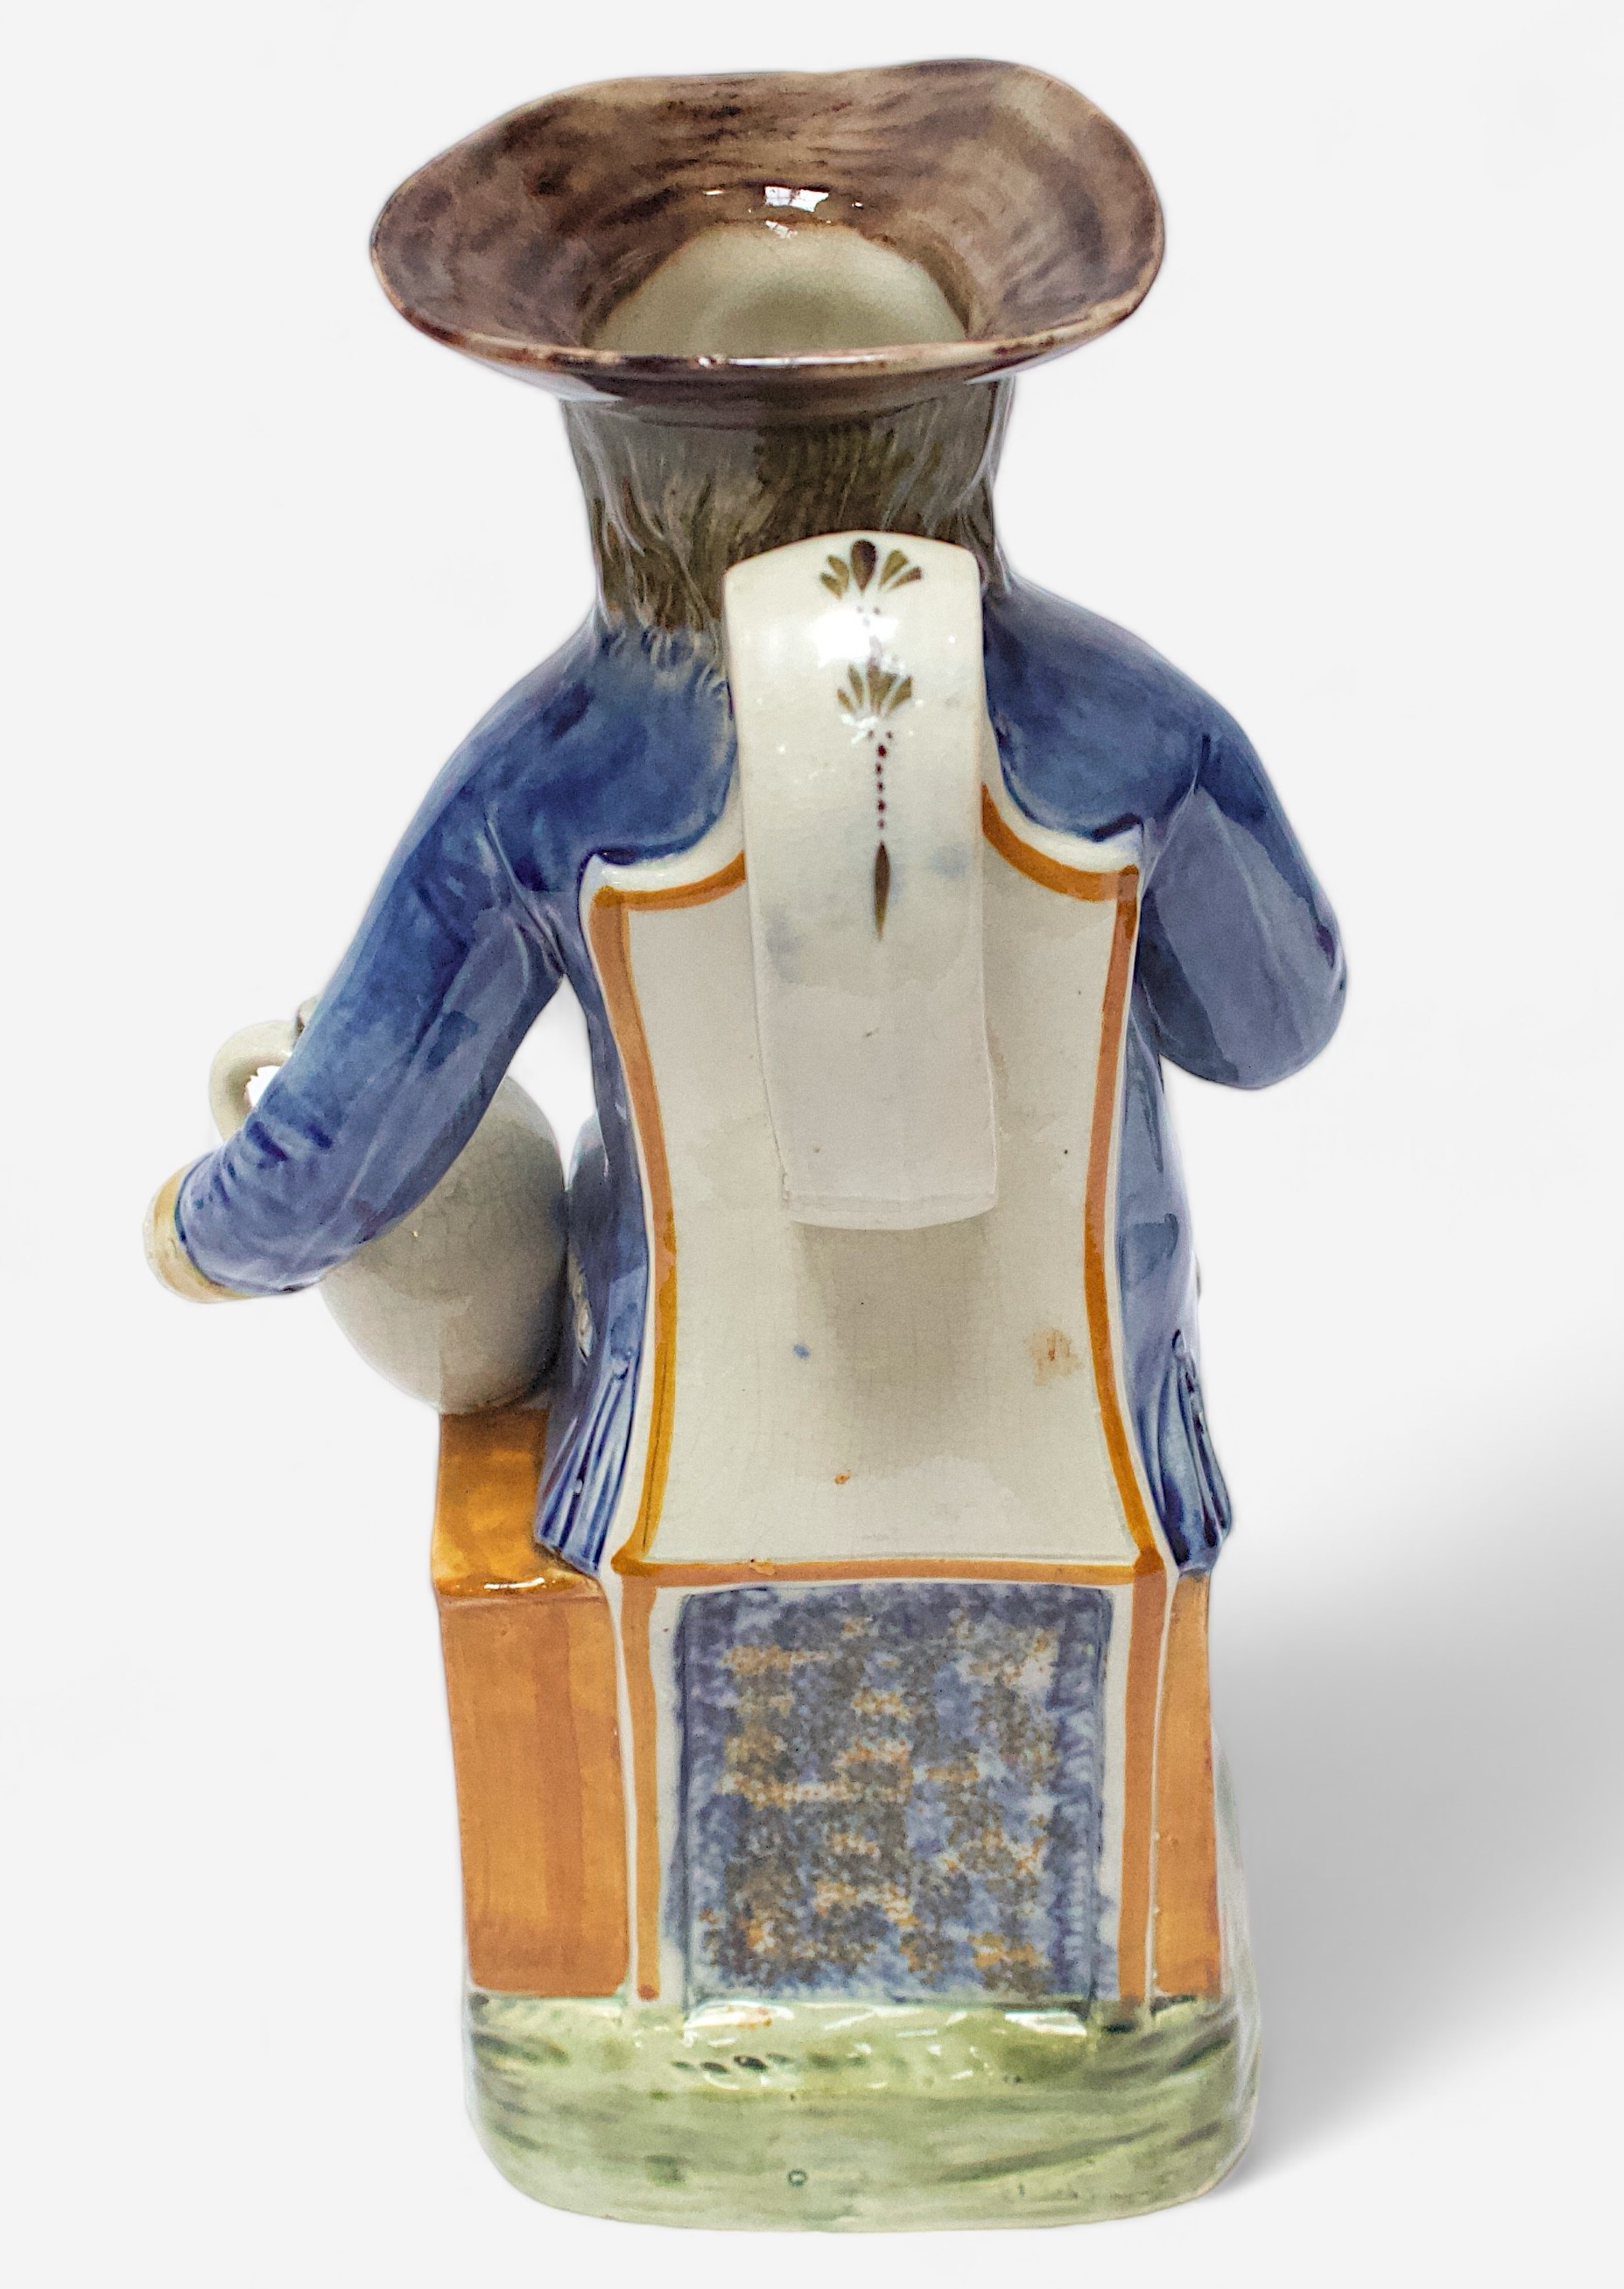 A Prattware Pottery ‘Sailor’ toby jug, c1790-1810, seated holding a jug, striped britches, blue coat - Image 3 of 4